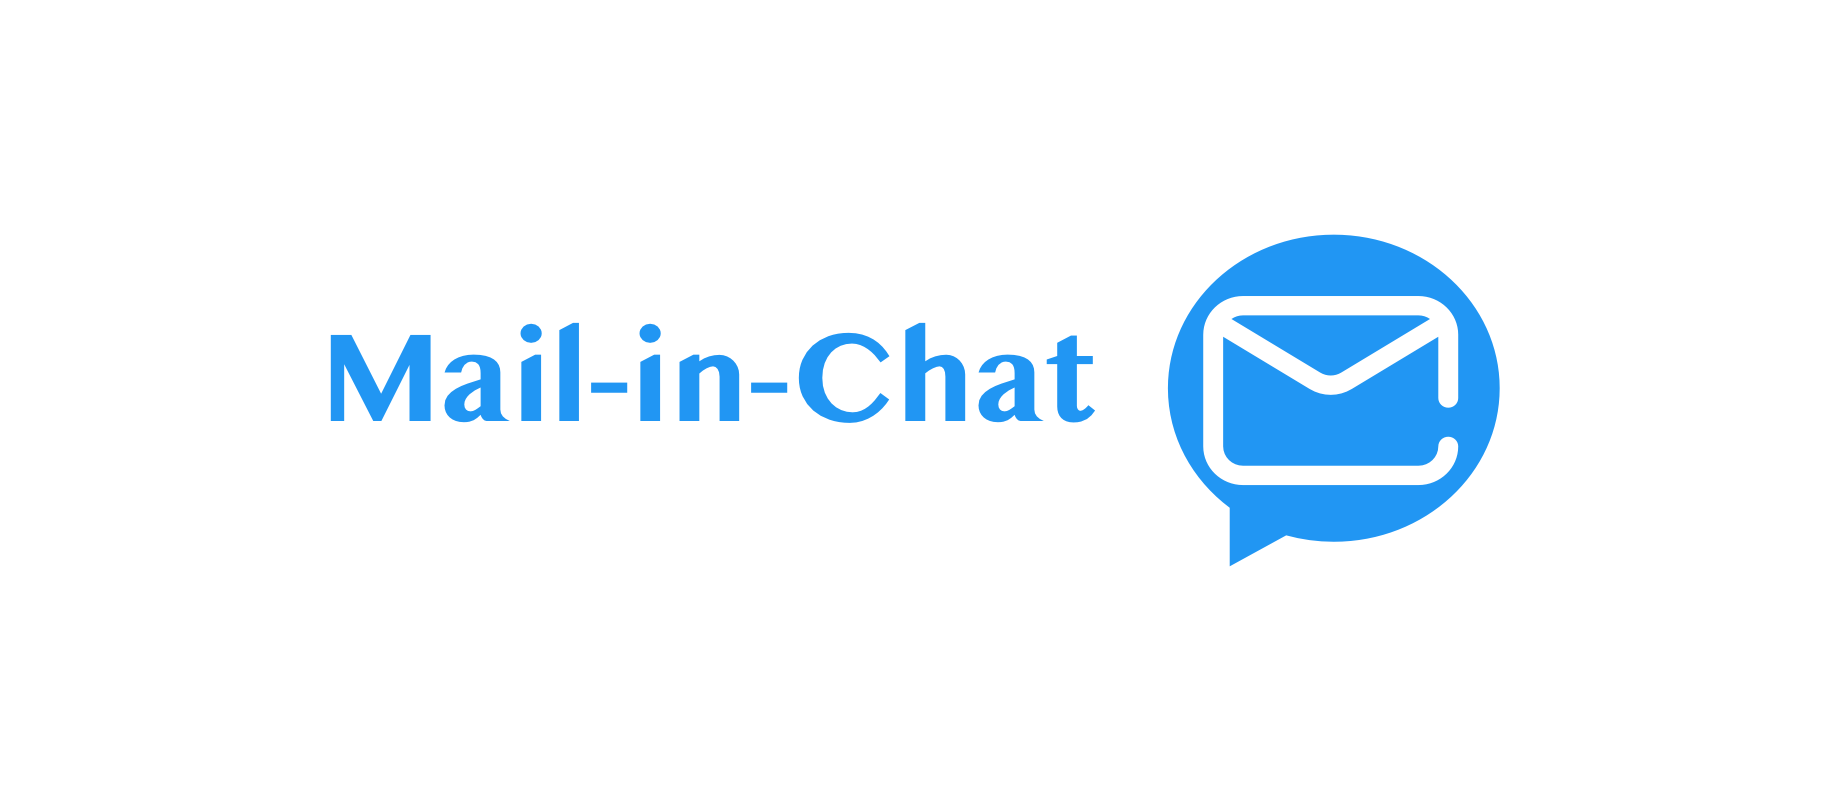 Mail-in-Chat: A ChatBot for Sending and Receiving Emails